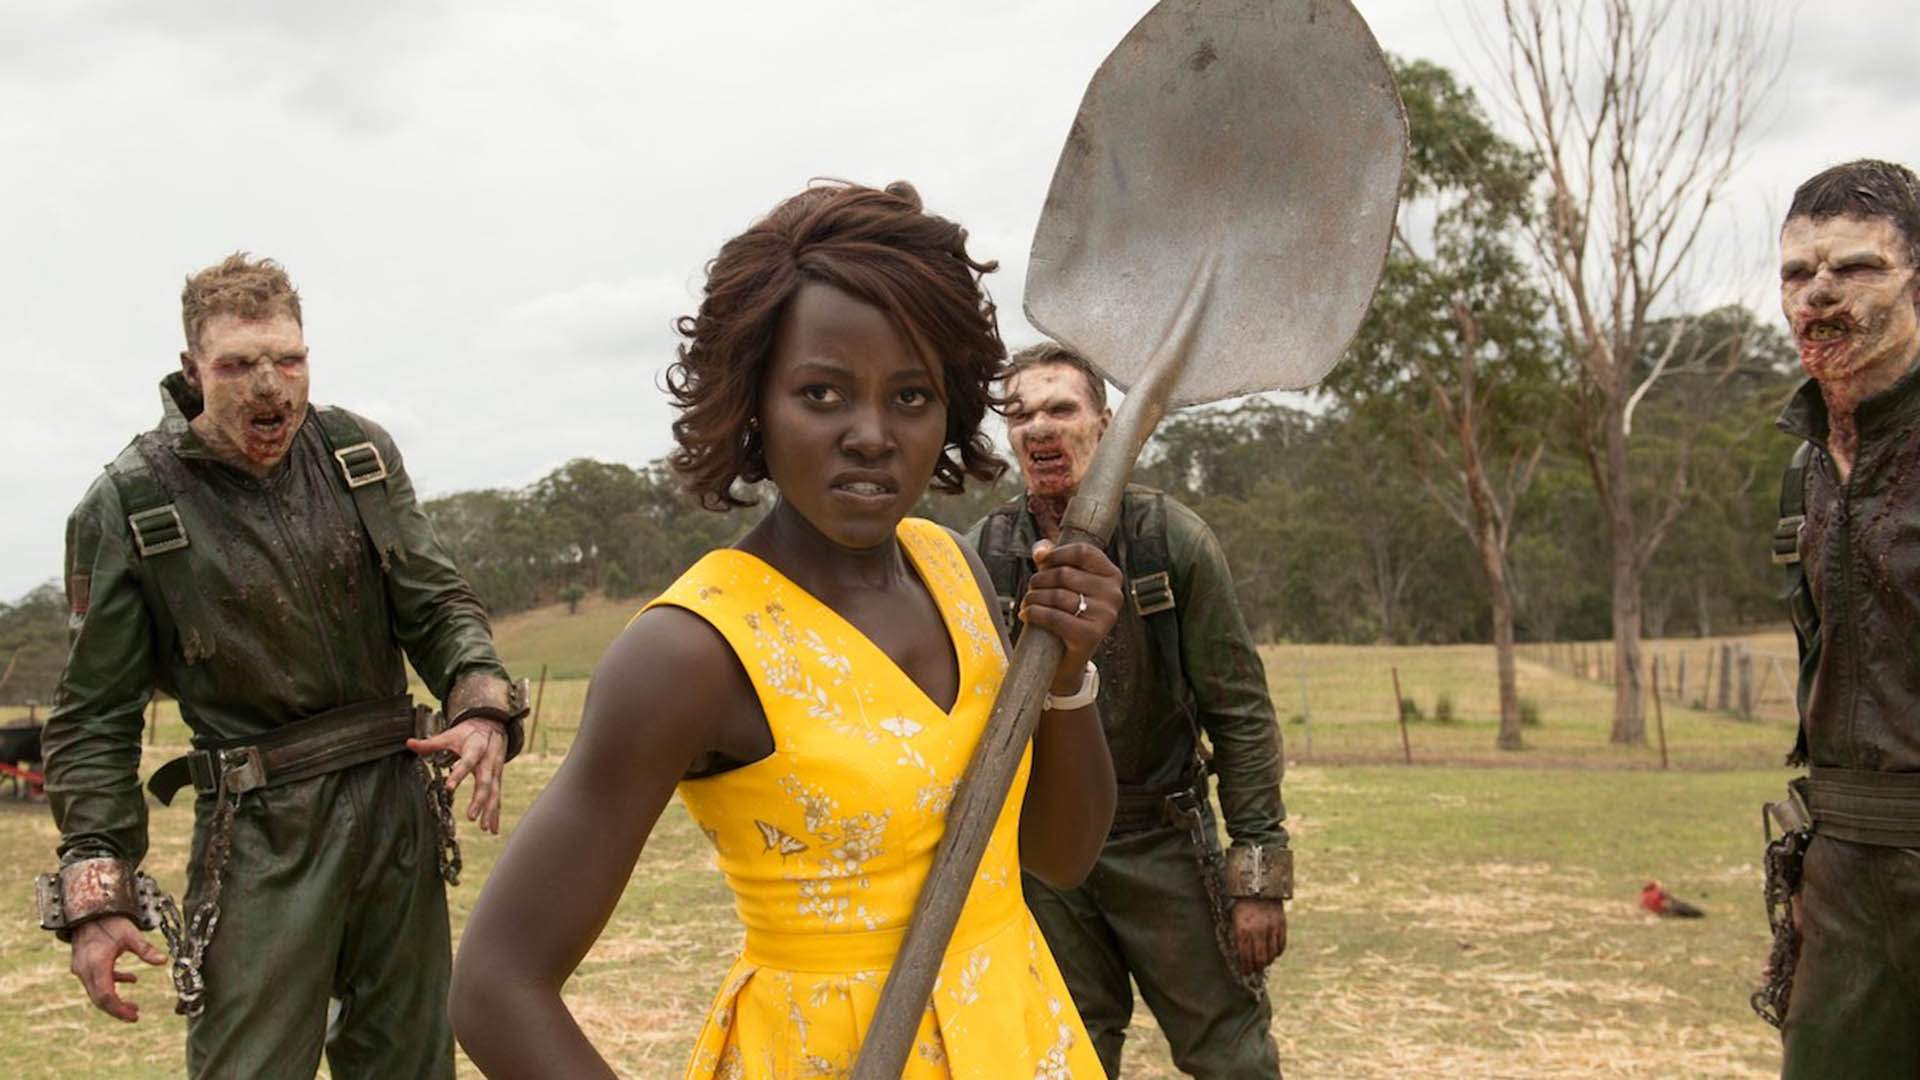 Lupita Nyong'o Slays the Undead in the Hilarious Trailer for Aussie Zombie Comedy 'Little Monsters'